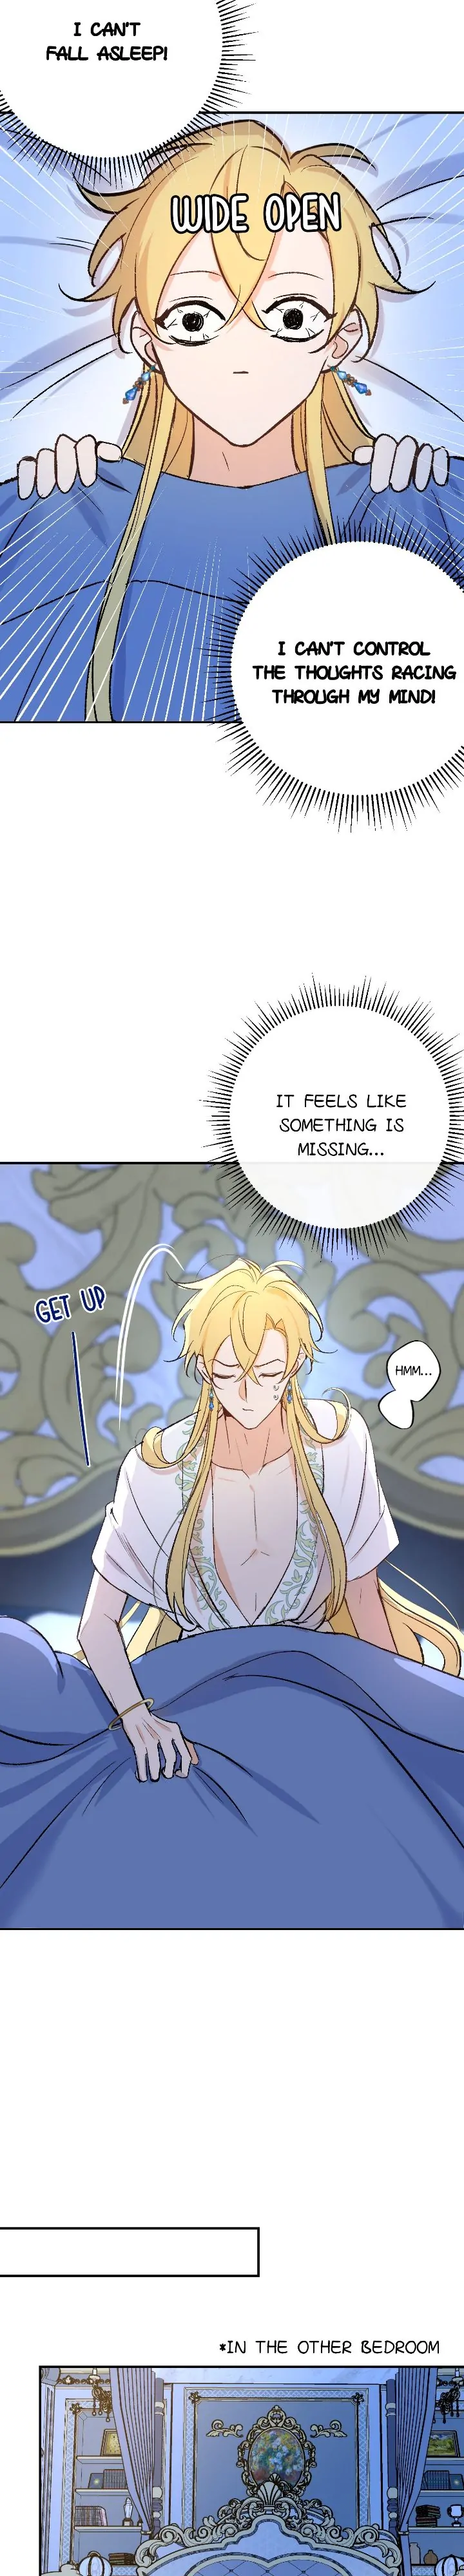 The Priest Dreaming of a Dragon chapter 23